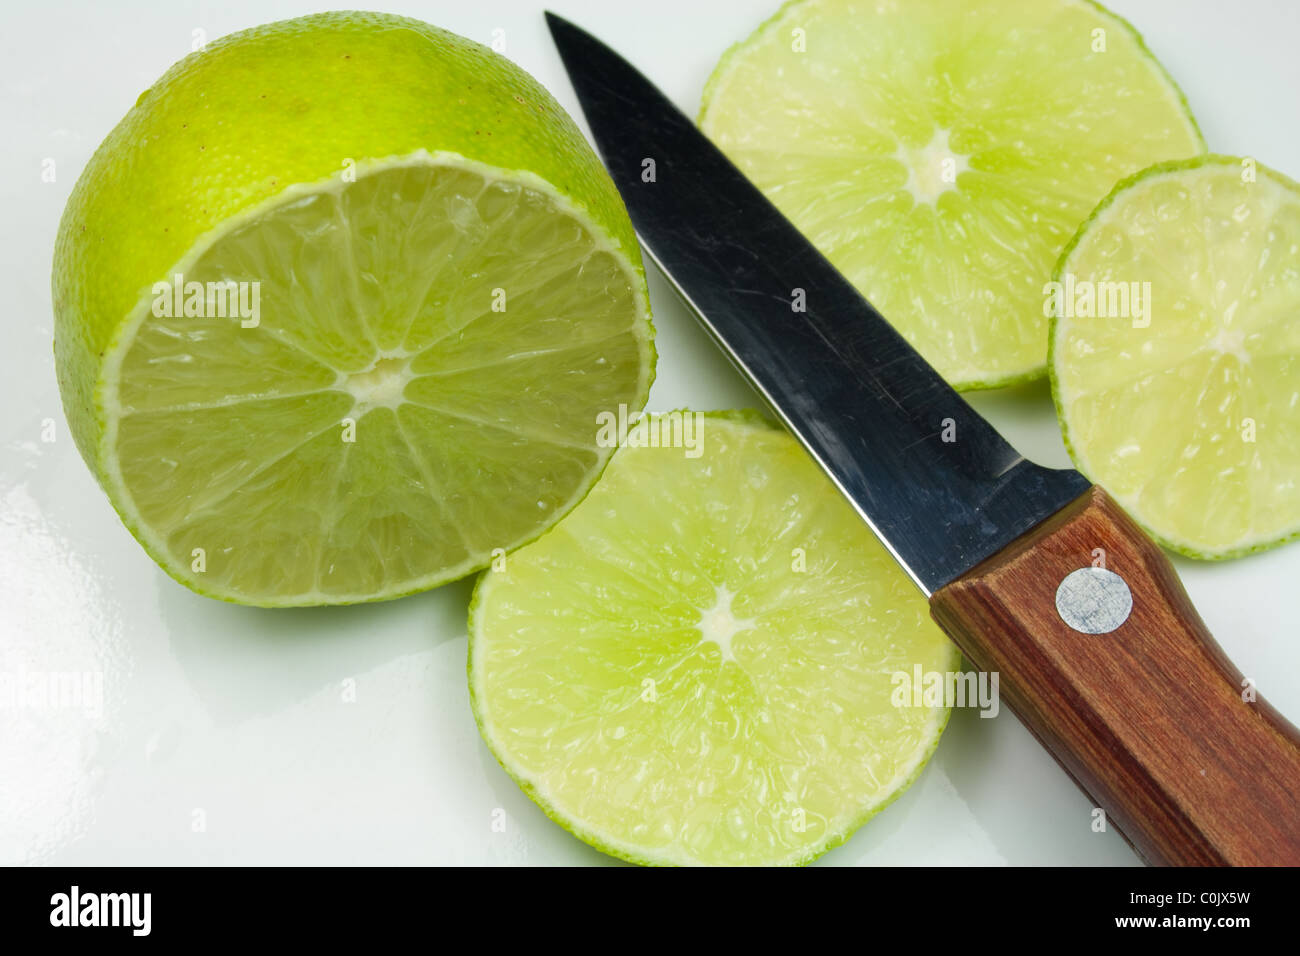 Sliced Lime Fruit and Knife Stock Photo